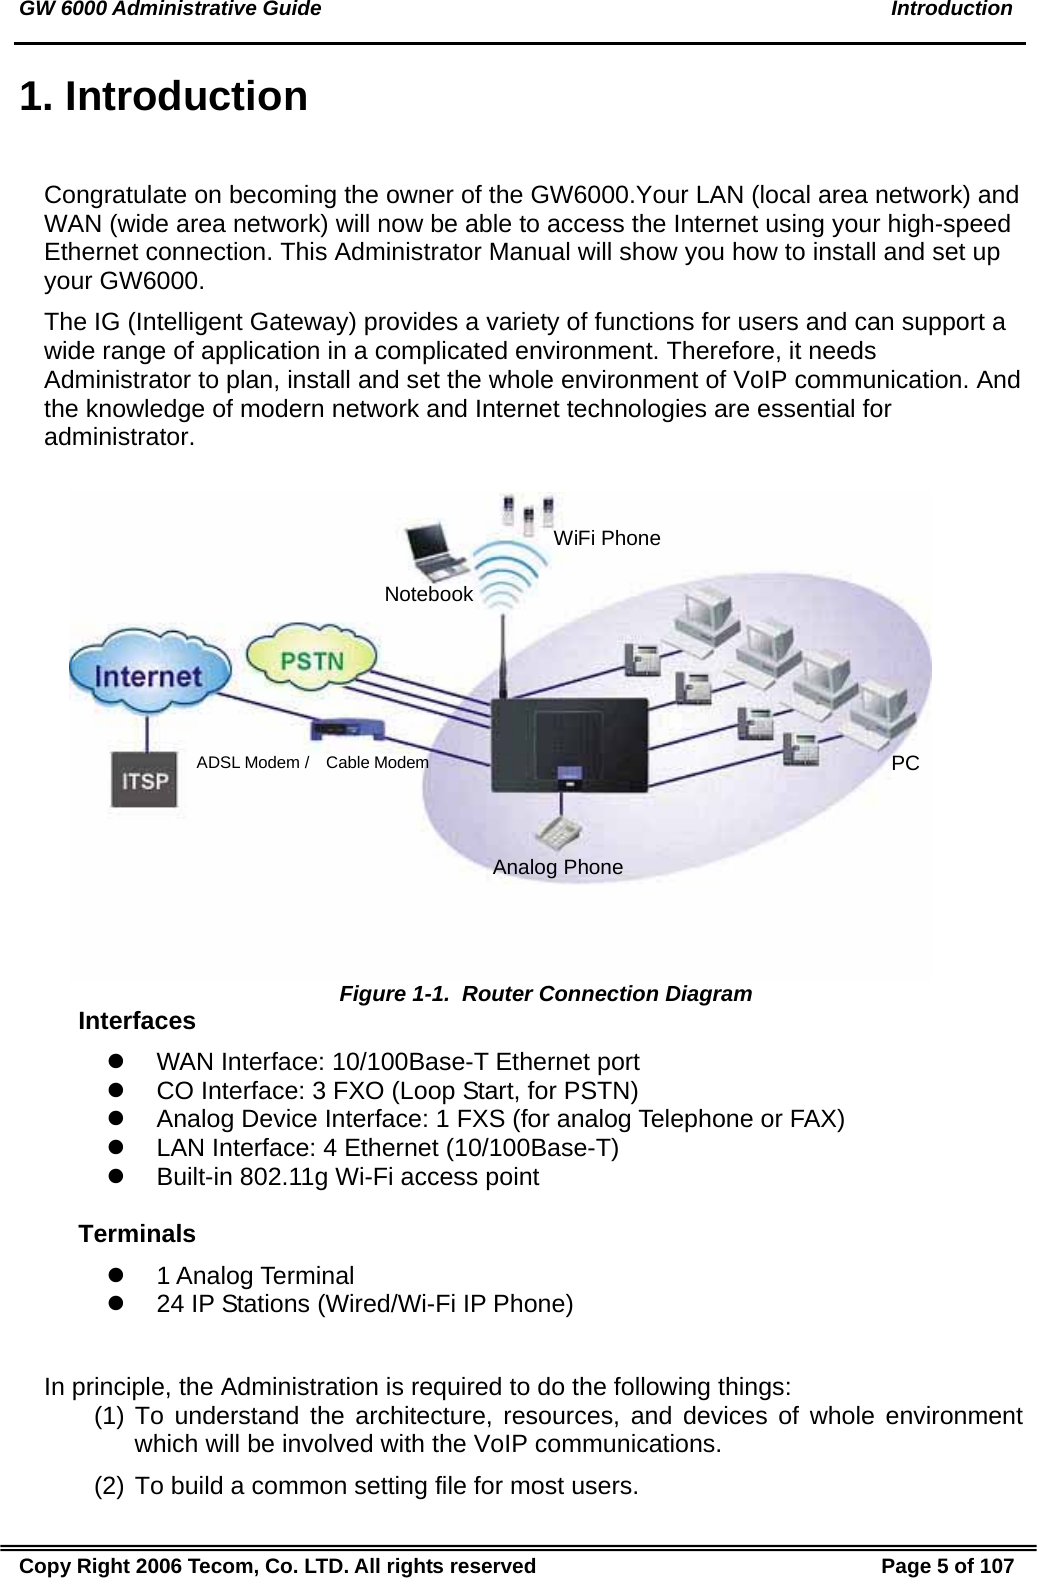 GW 6000 Administrative Guide    Introduction 1. Introduction Congratulate on becoming the owner of the GW6000.Your LAN (local area network) and WAN (wide area network) will now be able to access the Internet using your high-speed Ethernet connection. This Administrator Manual will show you how to install and set up your GW6000. The IG (Intelligent Gateway) provides a variety of functions for users and can support a wide range of application in a complicated environment. Therefore, it needs Administrator to plan, install and set the whole environment of VoIP communication. And the knowledge of modern network and Internet technologies are essential for administrator.  Analog PhoneADSL Modem /    Cable ModemWiFi PhoneNotebookPC Figure 1-1.  Router Connection Diagram Interfaces z  WAN Interface: 10/100Base-T Ethernet port z  CO Interface: 3 FXO (Loop Start, for PSTN) z  Analog Device Interface: 1 FXS (for analog Telephone or FAX) z  LAN Interface: 4 Ethernet (10/100Base-T) z  Built-in 802.11g Wi-Fi access point  Terminals z 1 Analog Terminal z  24 IP Stations (Wired/Wi-Fi IP Phone)  In principle, the Administration is required to do the following things: (1) To understand the architecture, resources, and devices of whole environment which will be involved with the VoIP communications. (2) To build a common setting file for most users. Copy Right 2006 Tecom, Co. LTD. All rights reserved  Page 5 of 107  